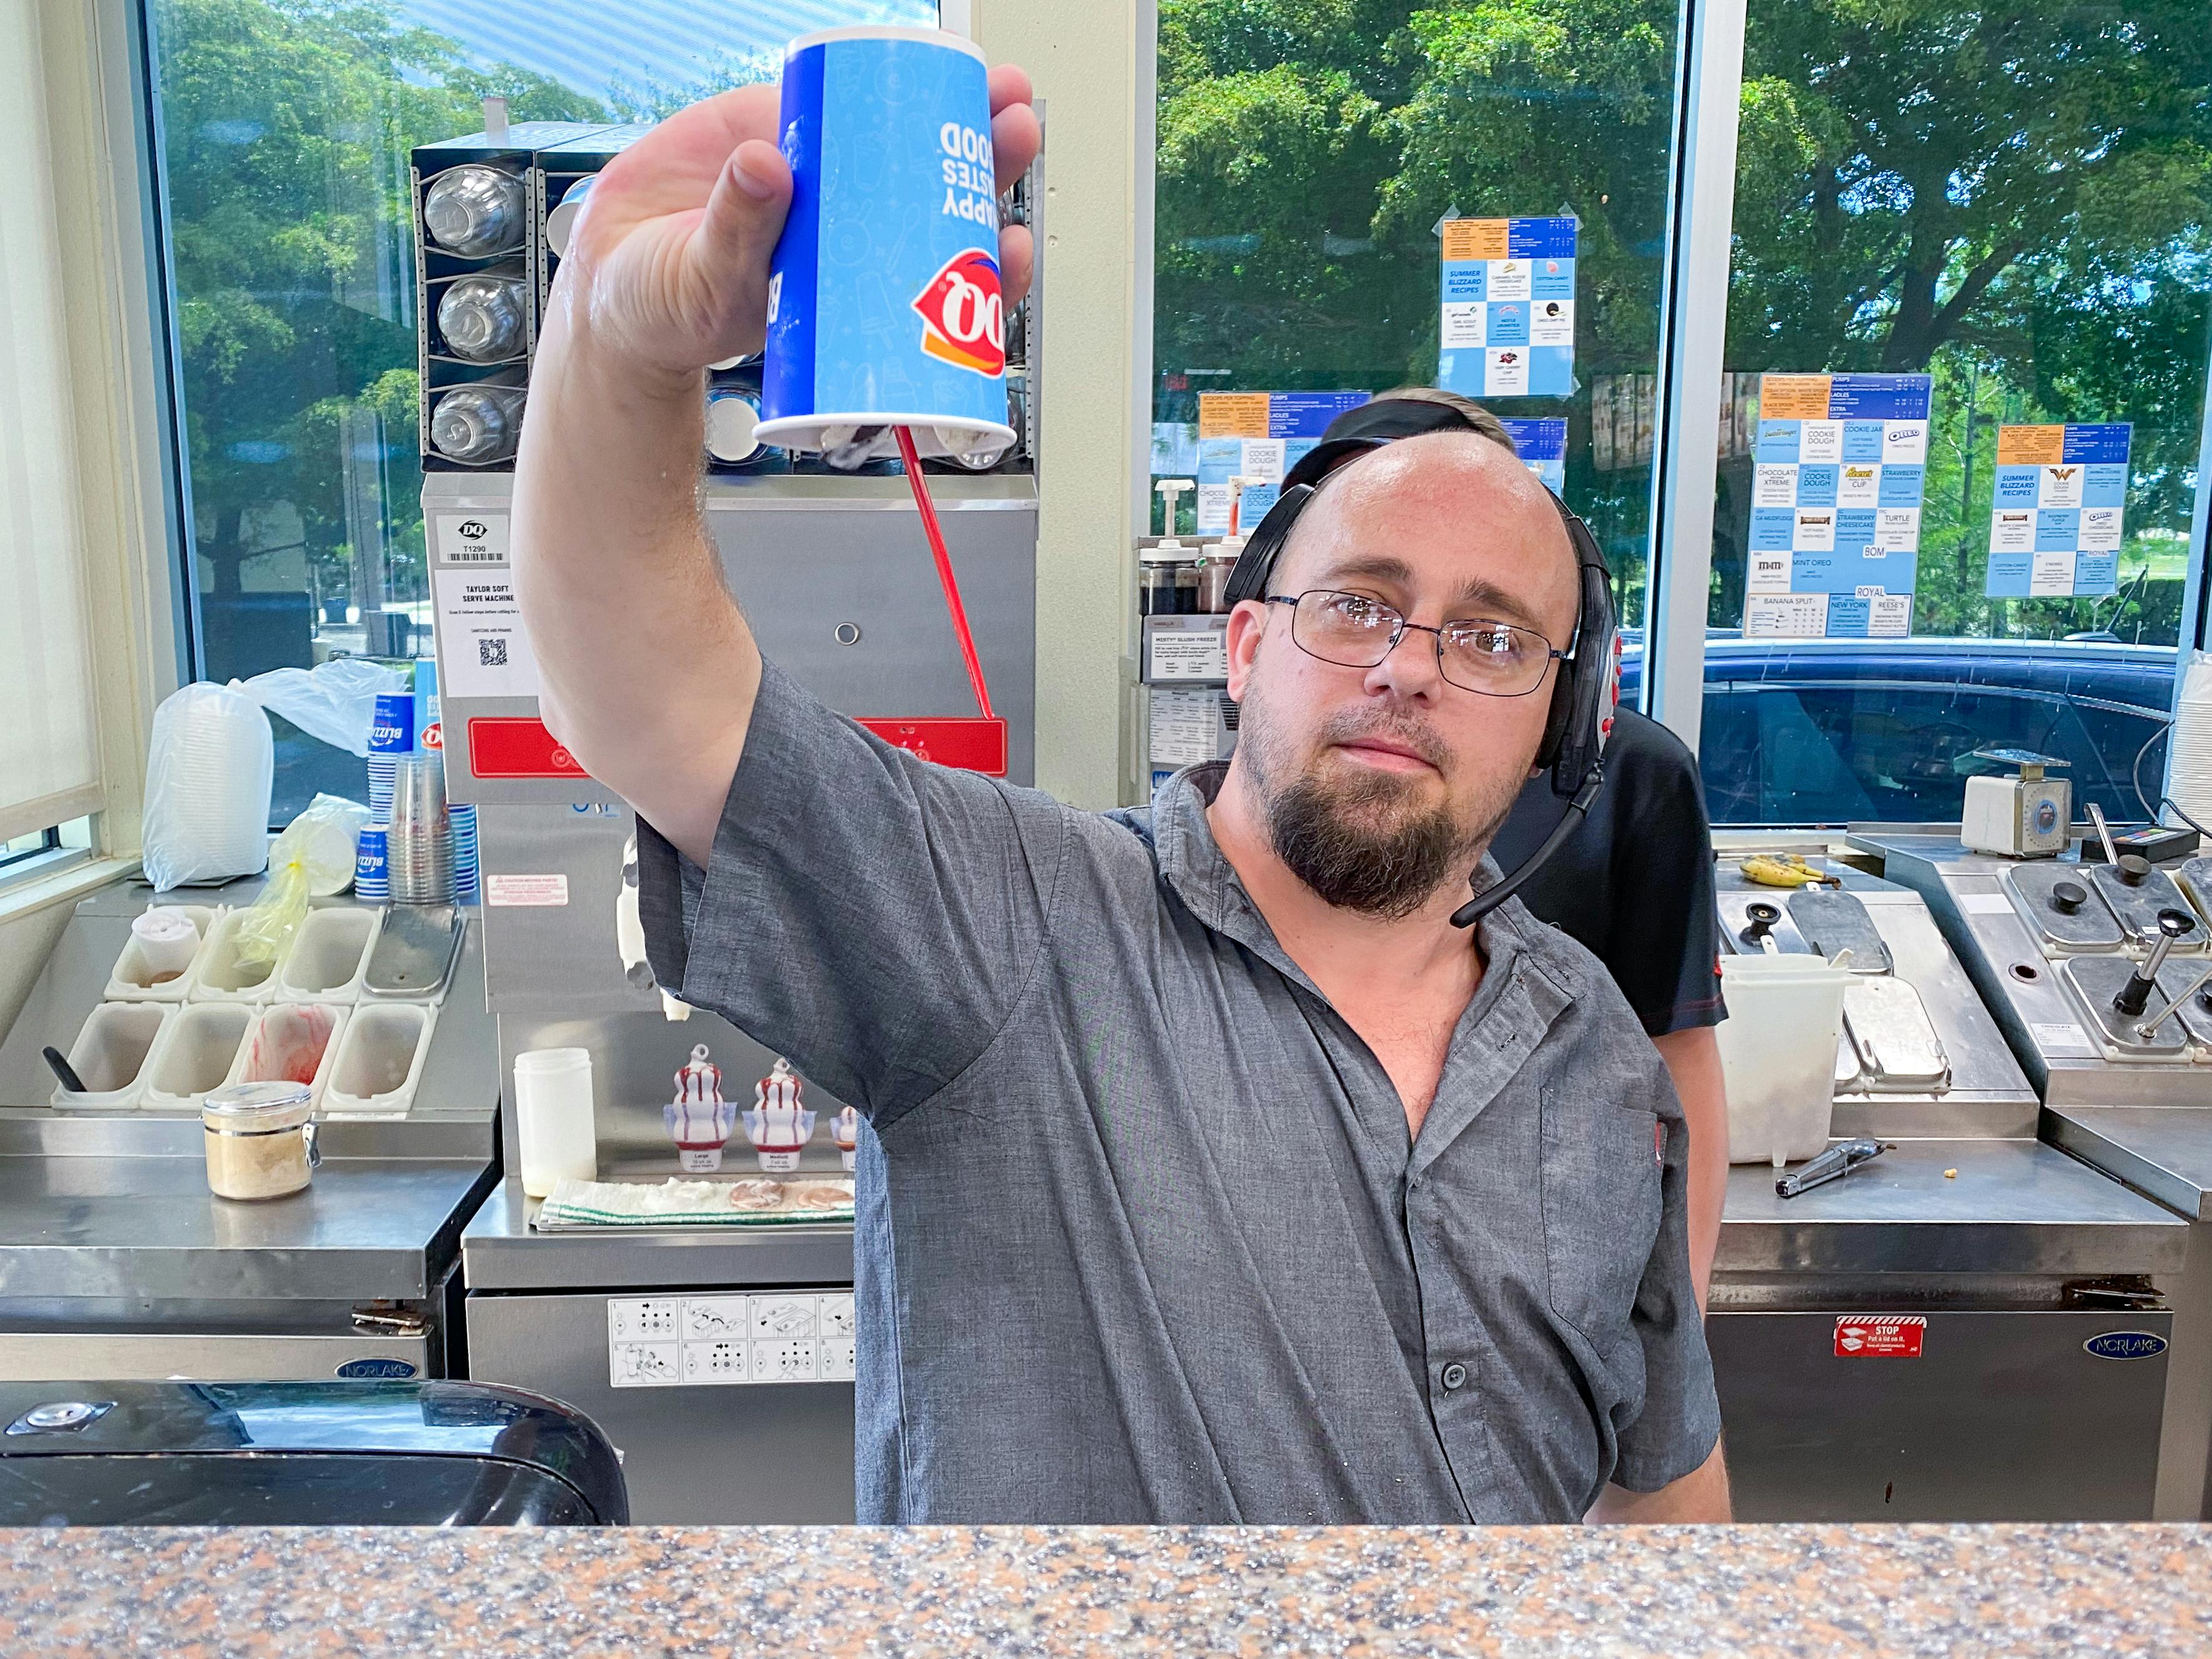 A Dairy Queen employee turning a Blizzard upside-down before serving it.